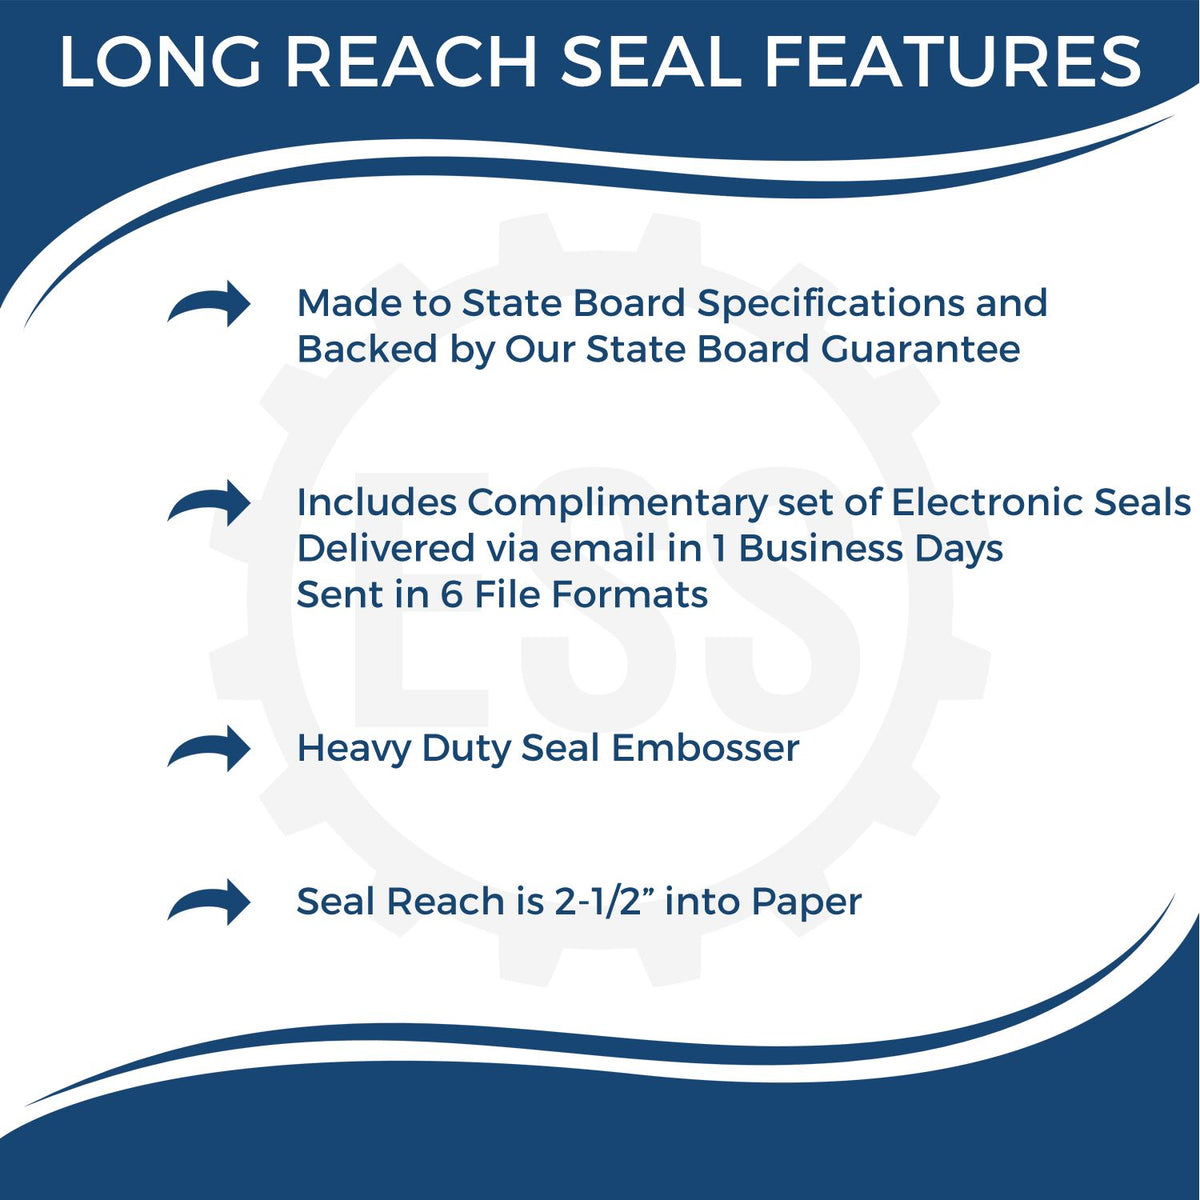 A picture of an infographic highlighting the selling points for the Long Reach Connecticut PE Seal